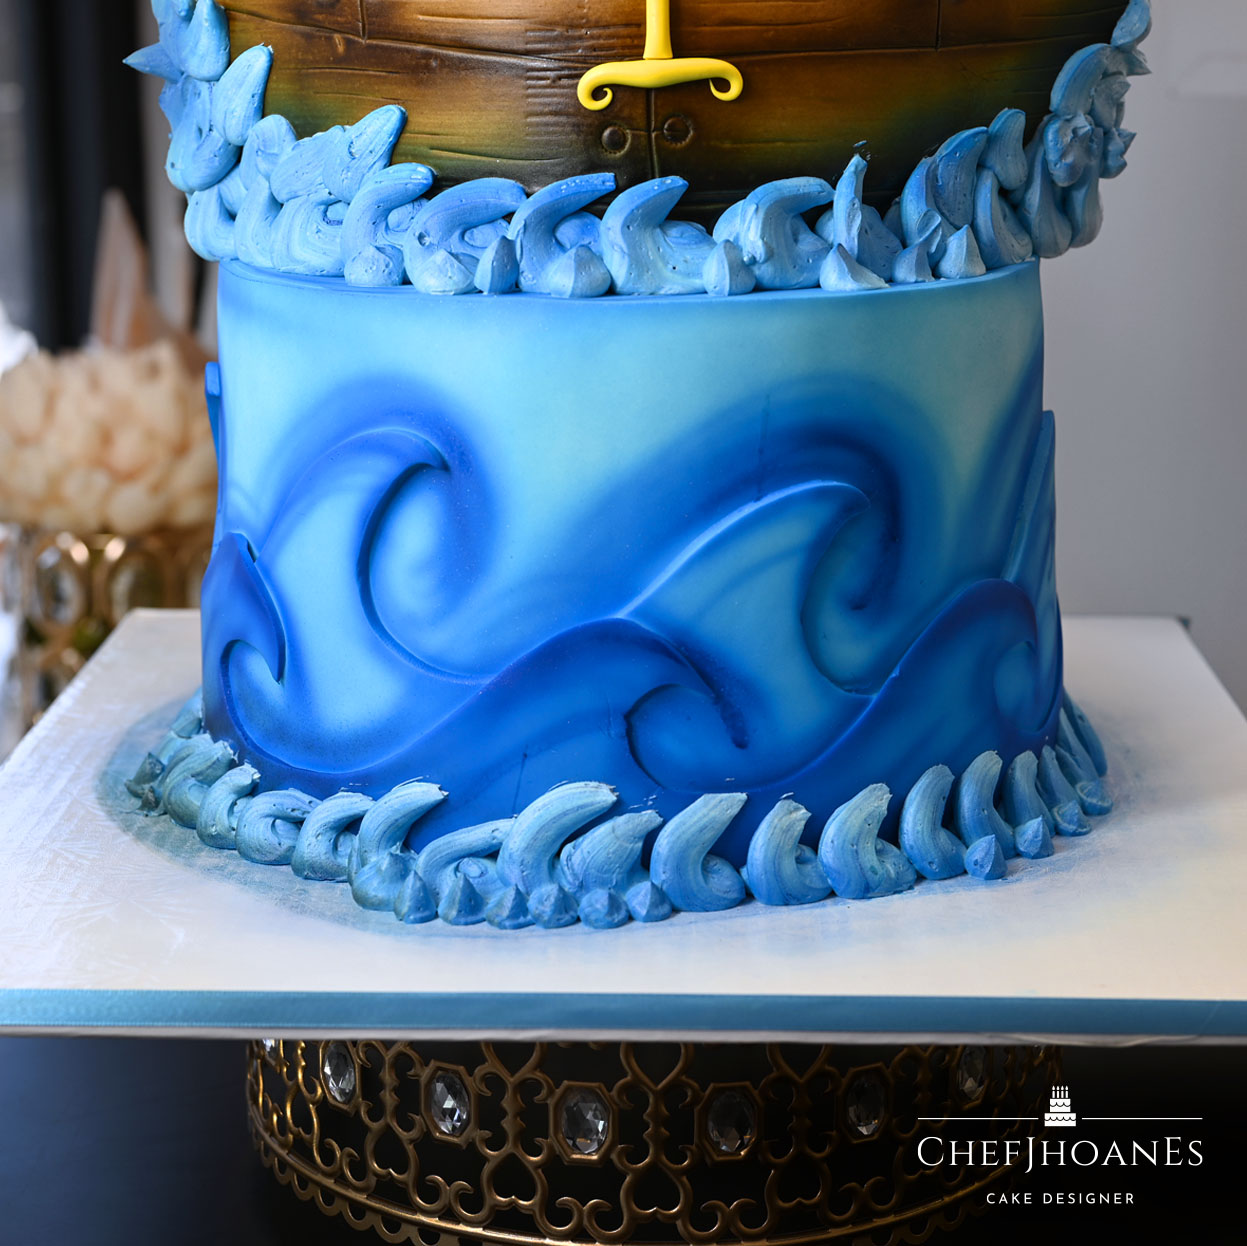 This Noah's Ark Cake is Double the Fun! – All Things Cake